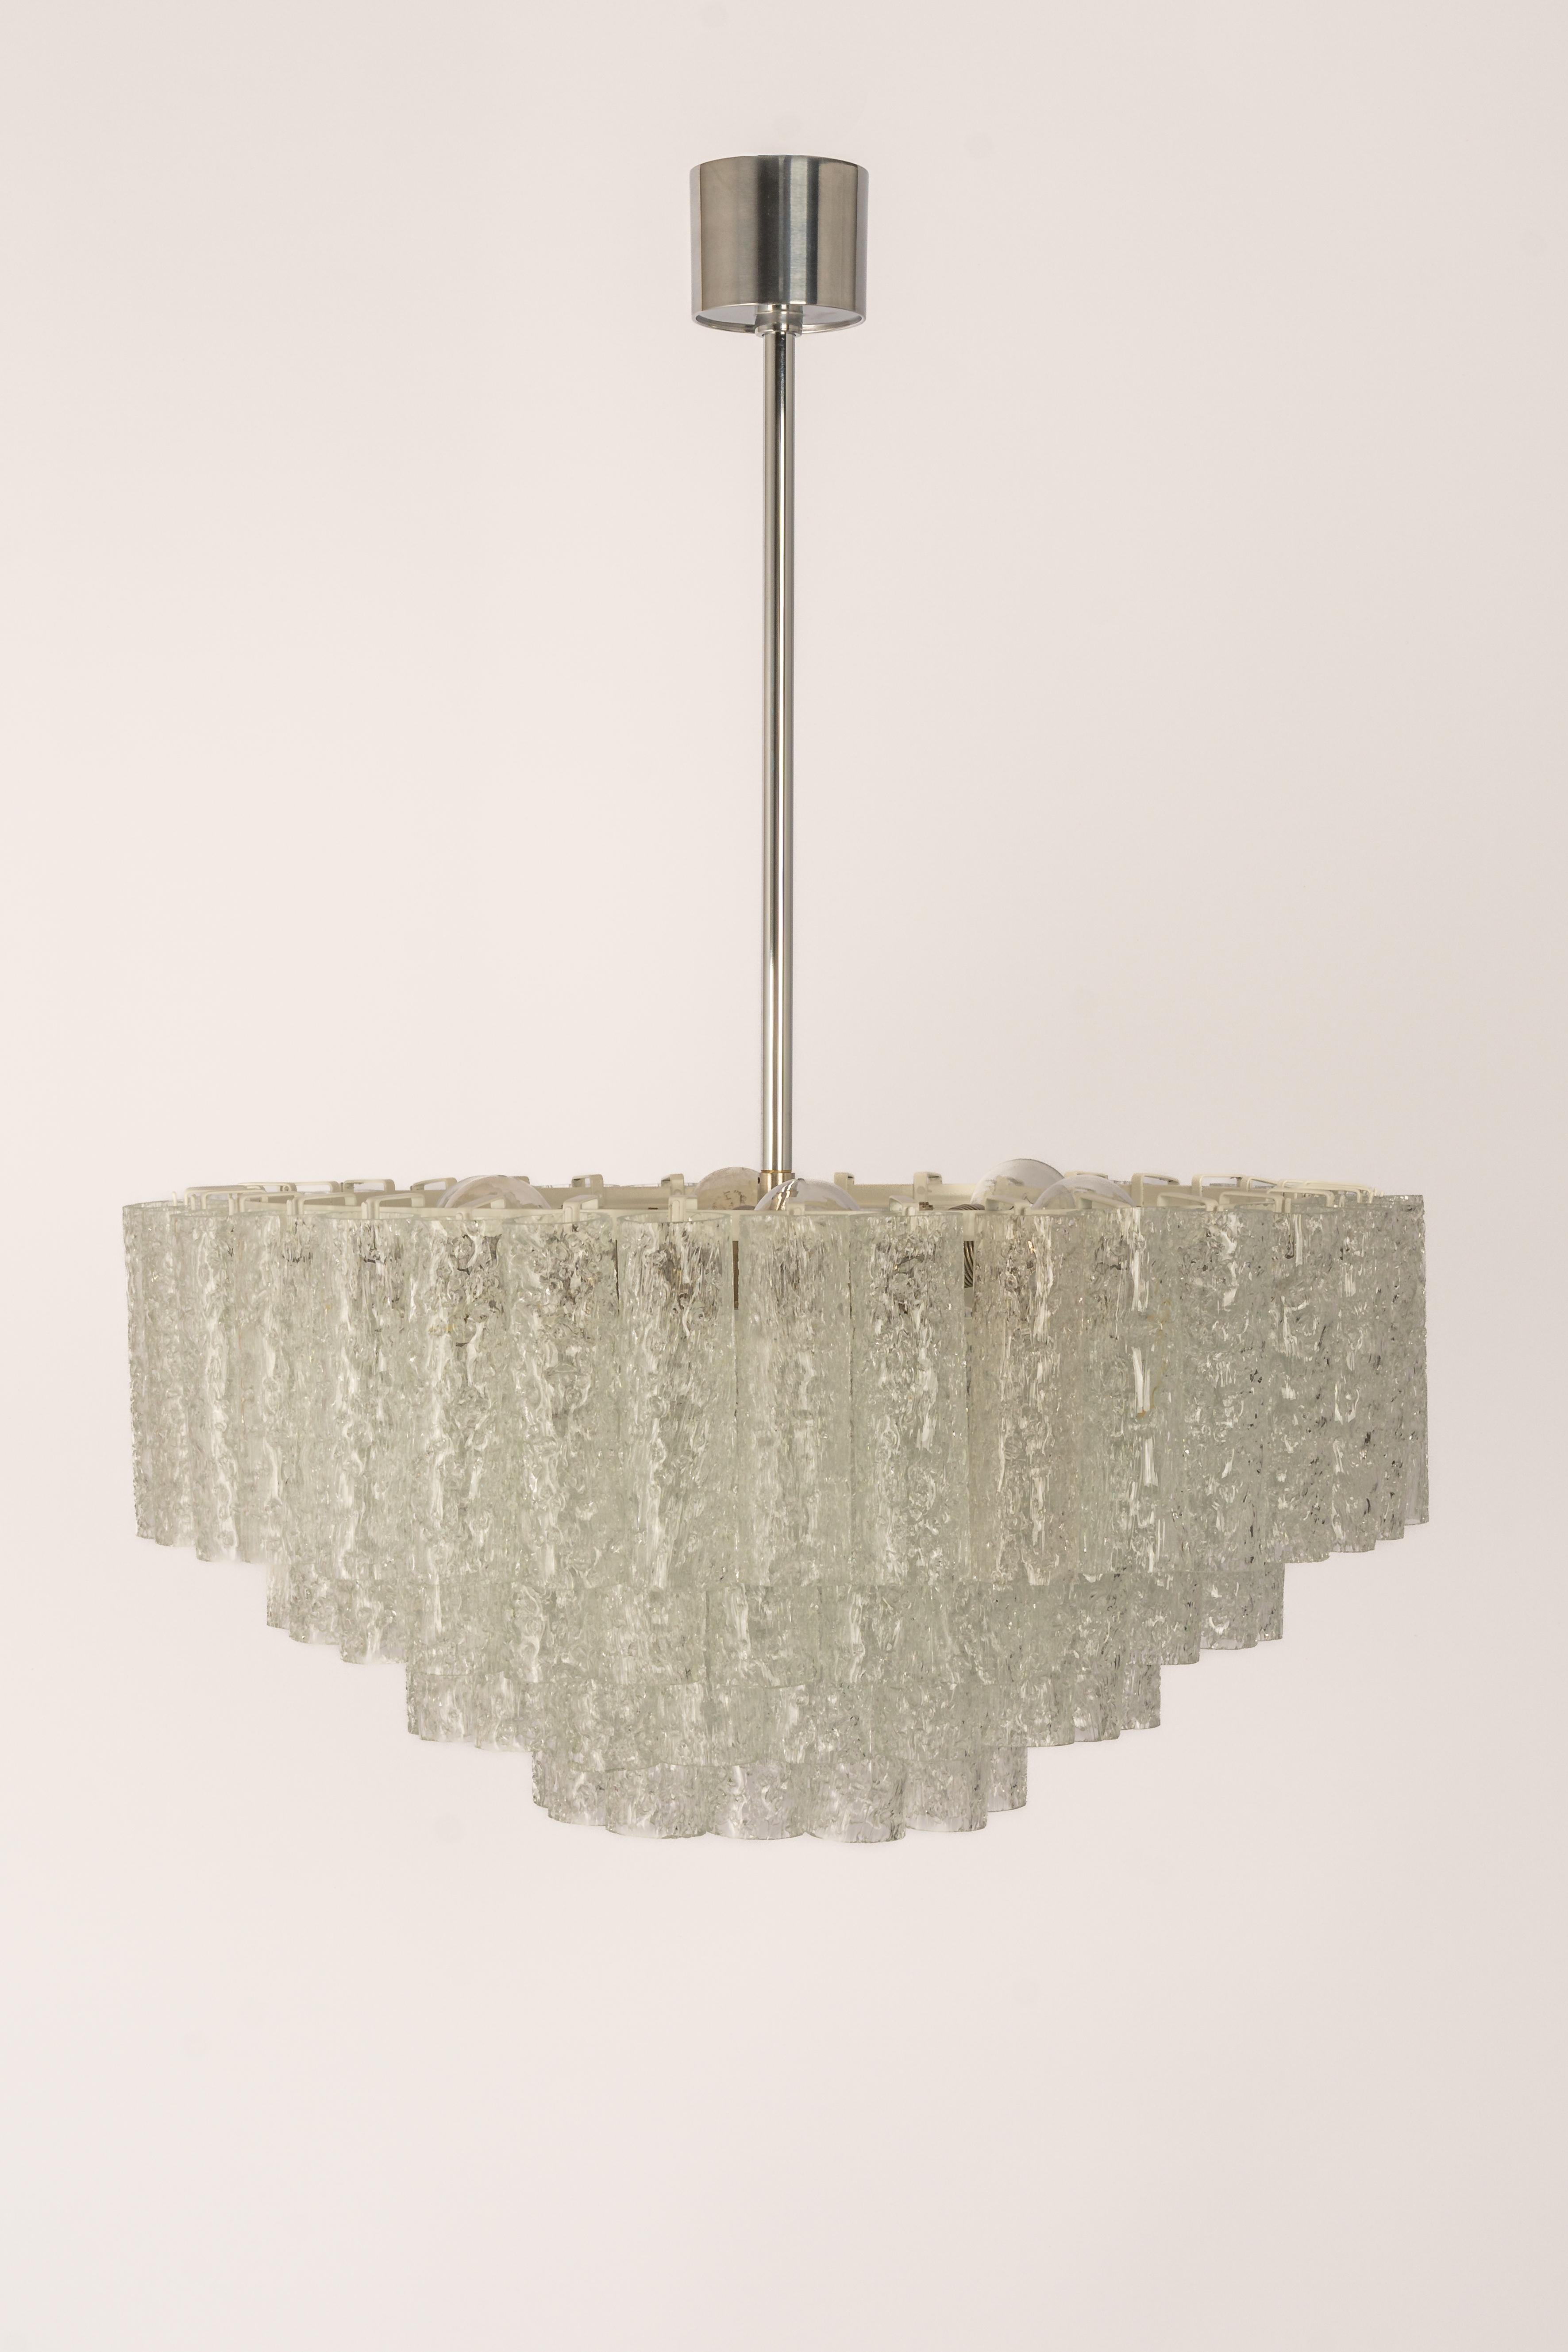 Fantastic four-tier midcentury chandelier by Doria, Germany, manufactured circa 1960-1969. 4 rings of Murano glass cylinders suspended from a fixture.

Sockets: 10 x E14 candelabra bulbs (up to 40 W each) .
Light bulbs are not included. It is